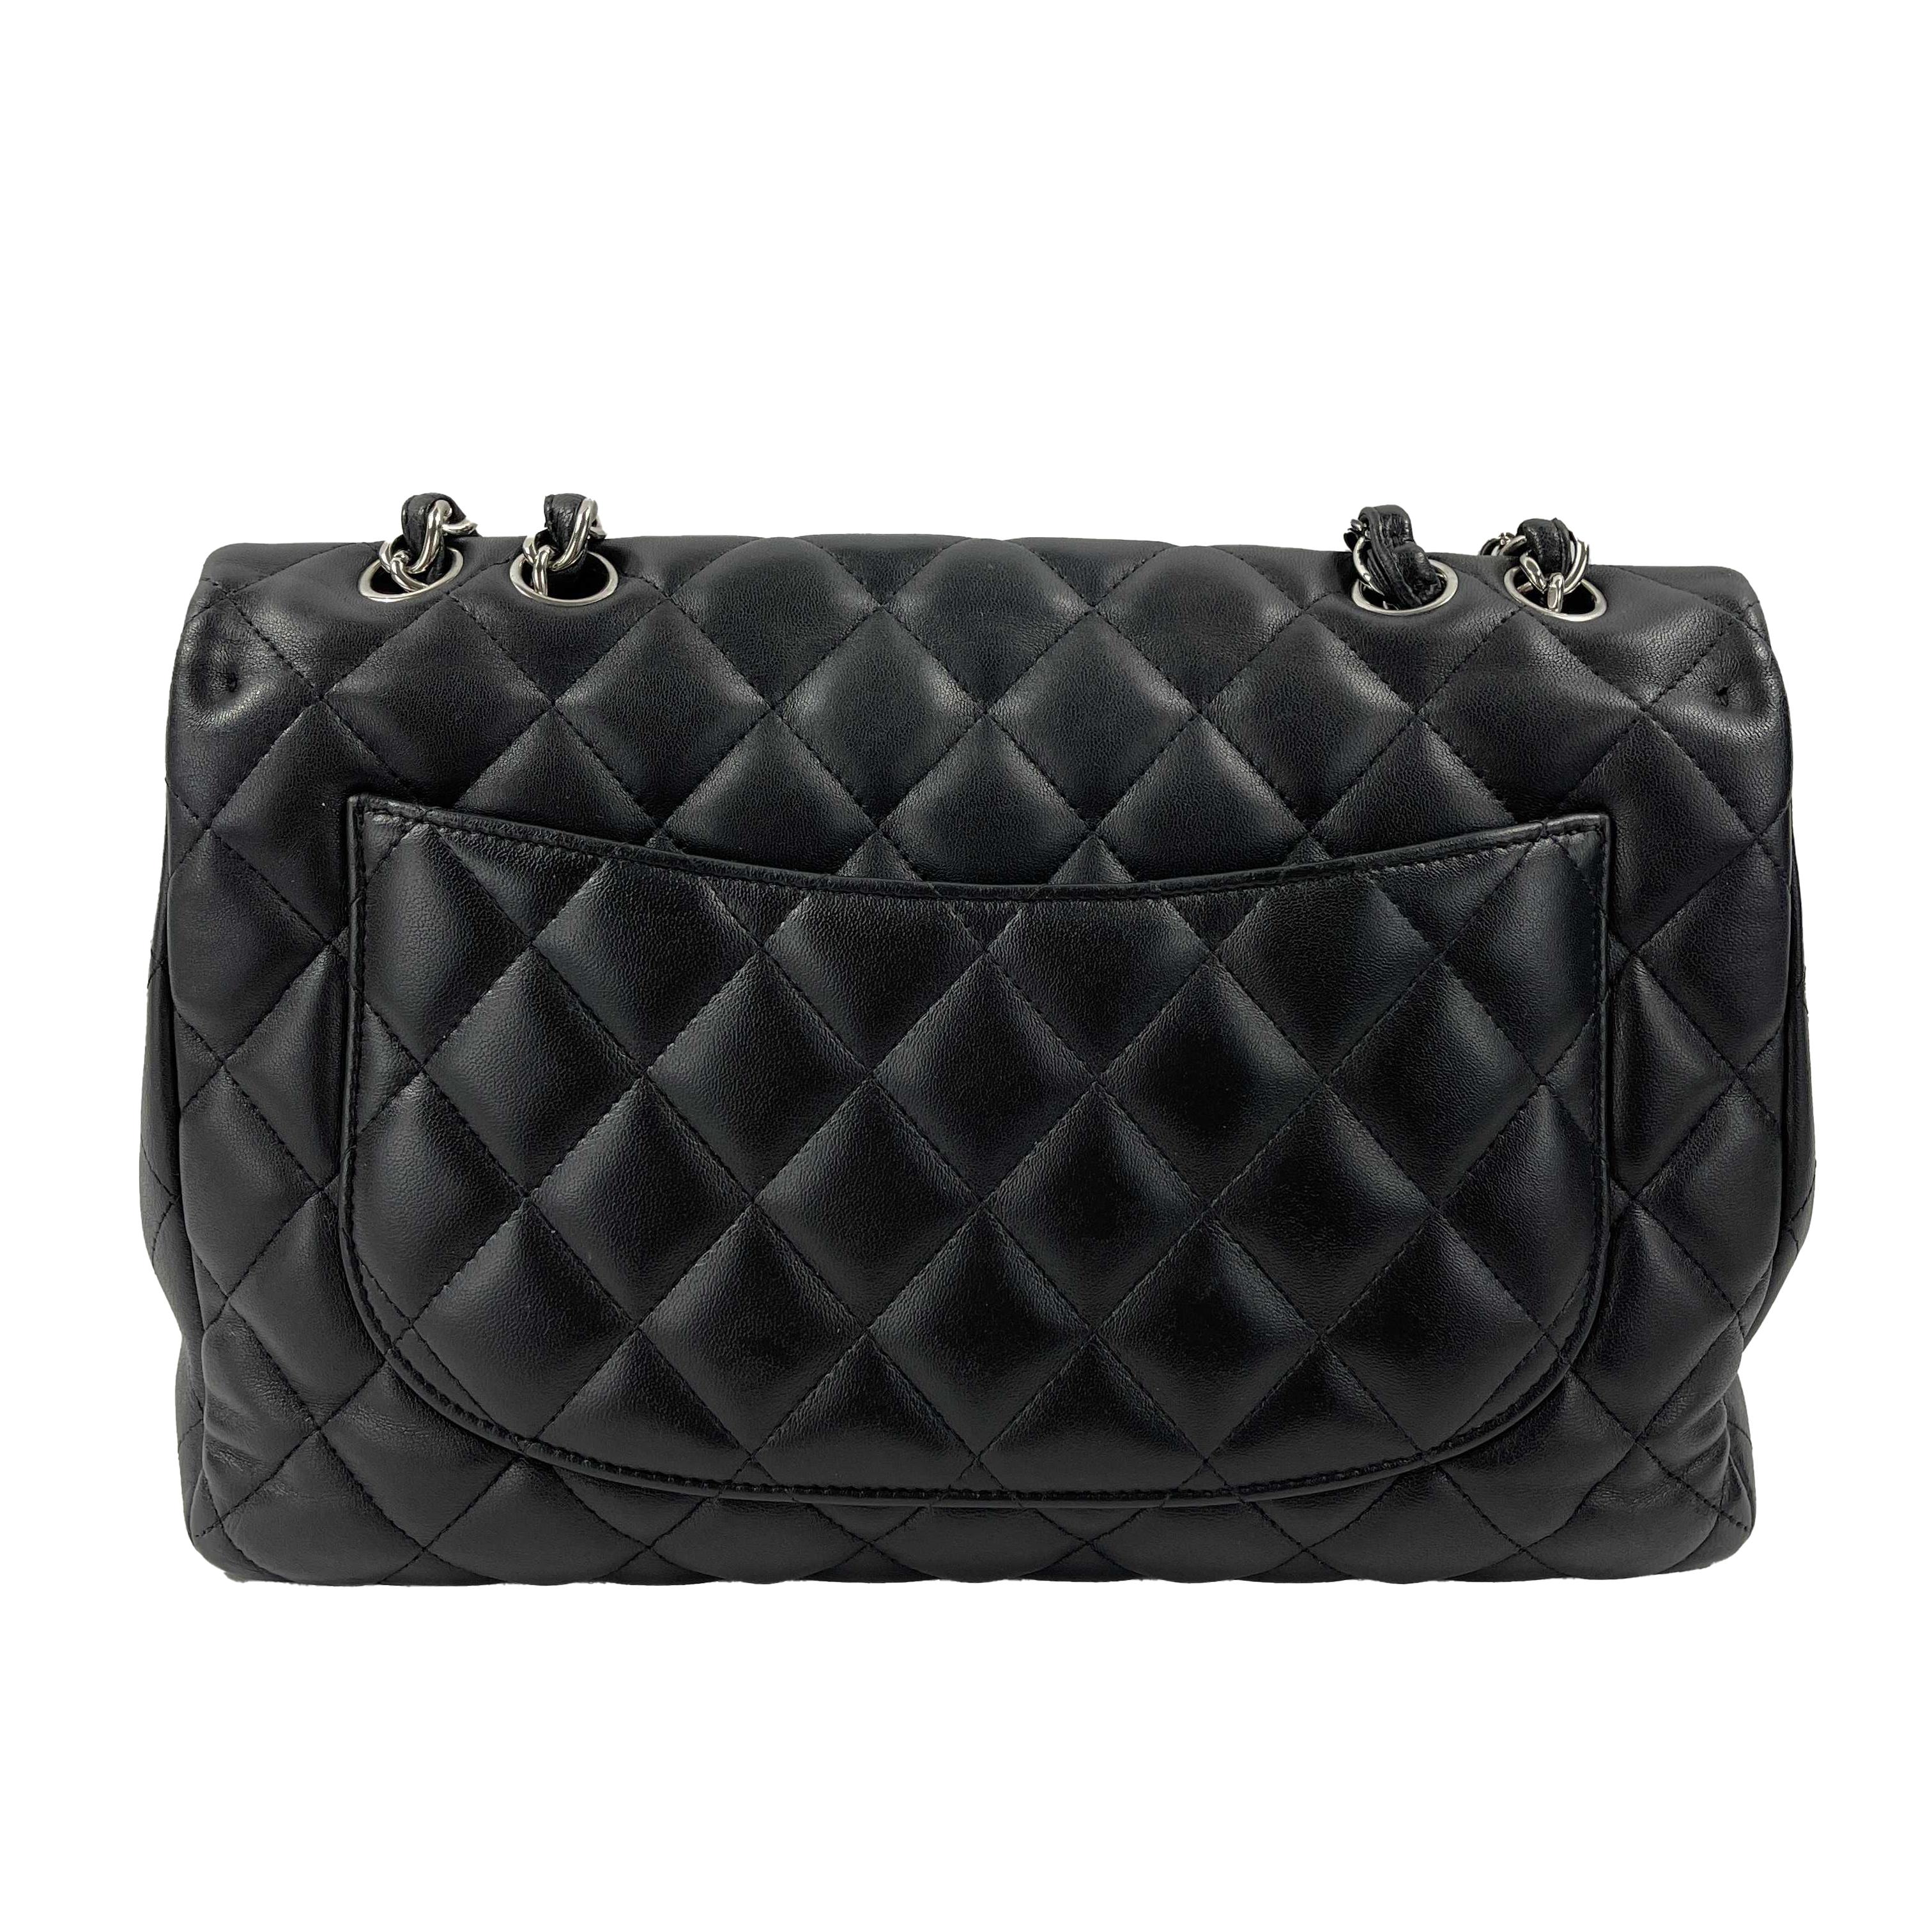 escription

* 2008-2009 Collection era.
* This classic flap bag features soft lambskin leather in black with the classic Chanel diamond quilt pattern.
* One main interior compartment with one slip pocket and one zip pocket.
* Slip pocket on back.
*